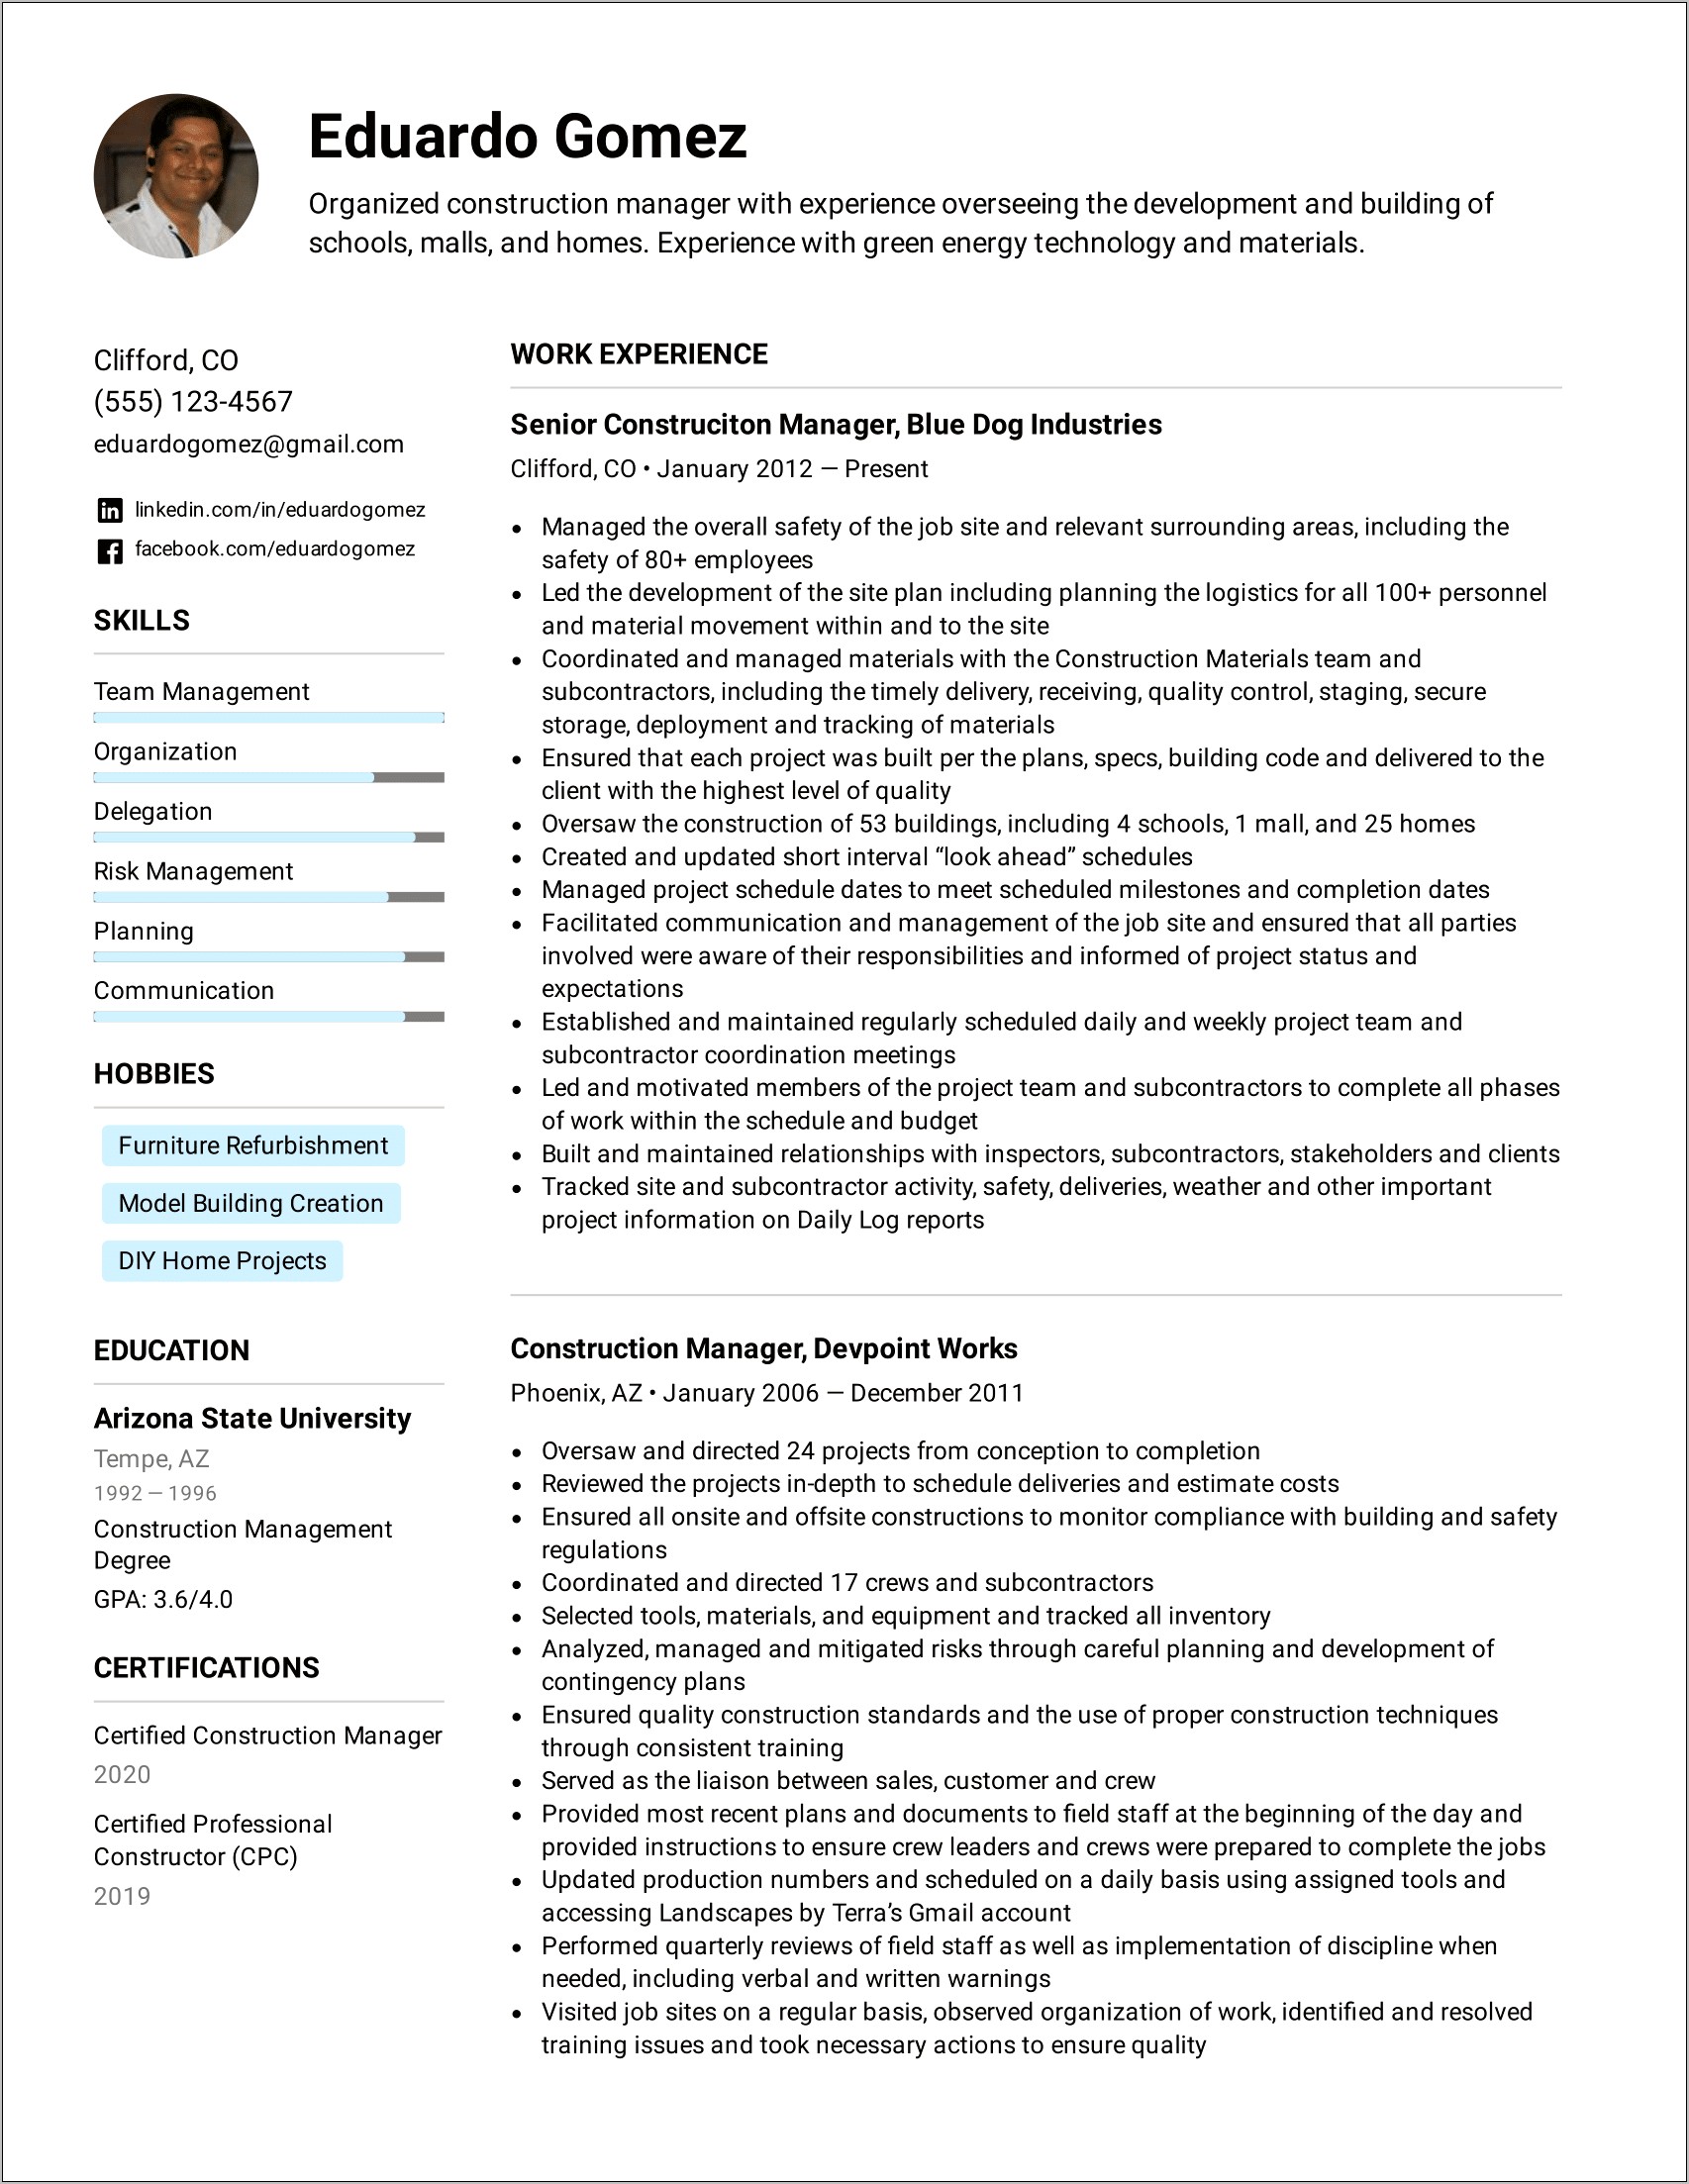 Construction Administration Construction Project Manager Resume